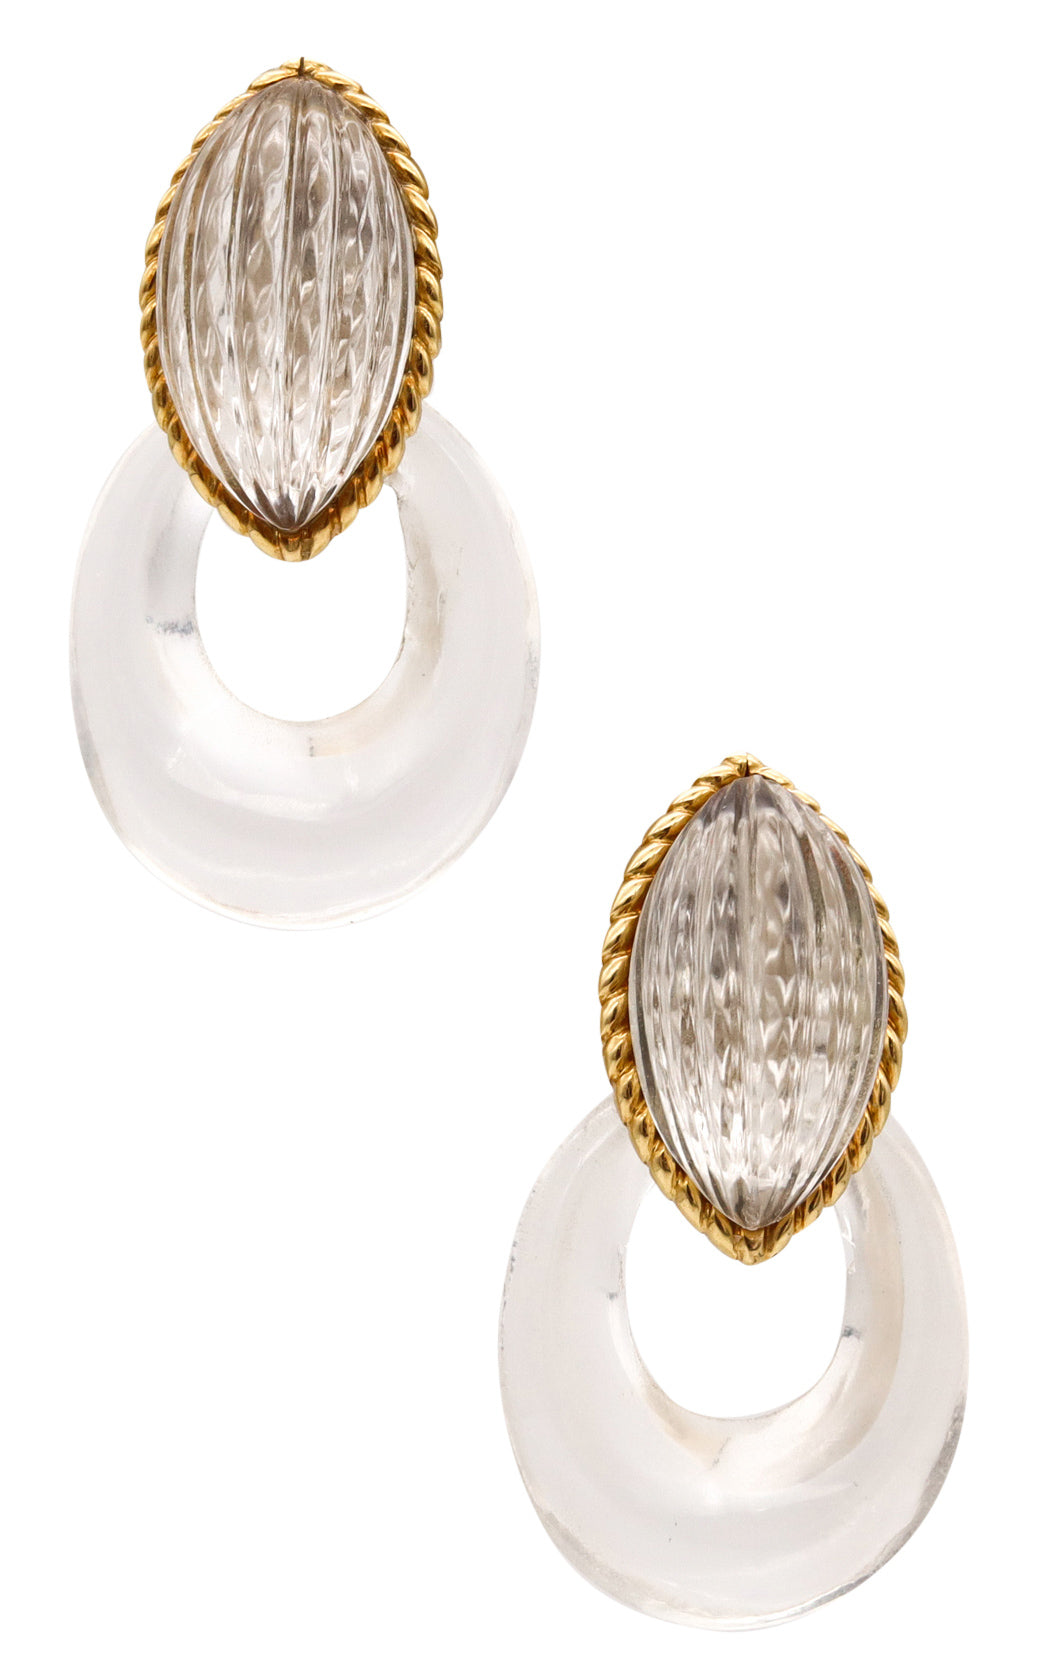 Arfan Paris 1970 By Andre Vassort Convertible Clip Earrings In 18Kt Yellow Gold With 54 Cts In Fluted Rock Quartz